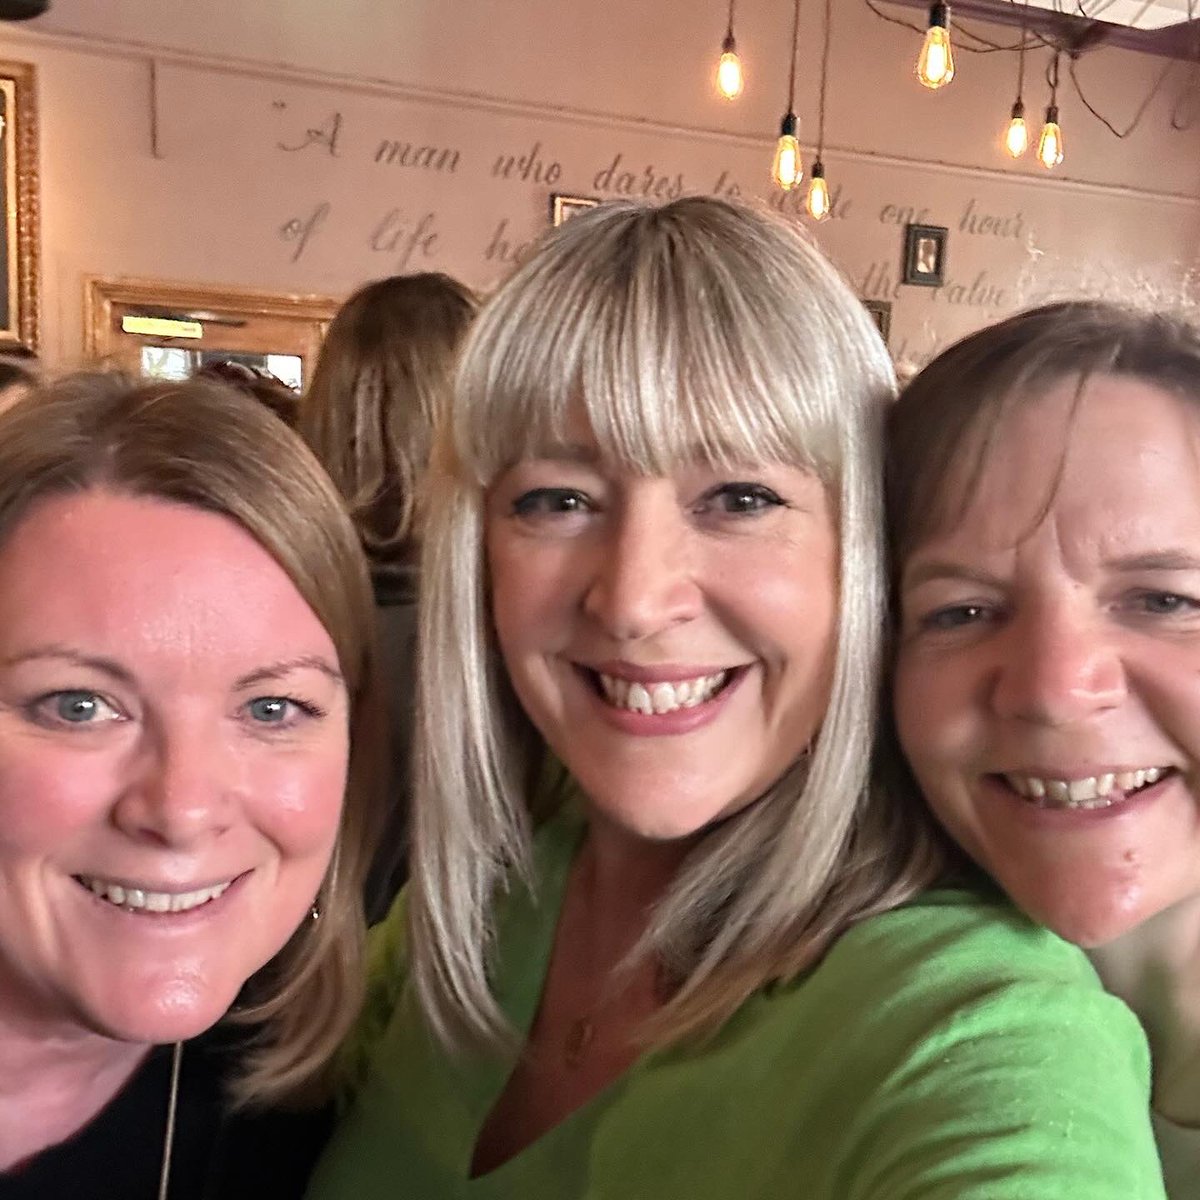 What a joy it was to celebrate the launch of #TheDayShelleyWoodhouseWokeUp with the wonderful @LauraPAuthor and loads of gorgeous author pals. 
It’s such a beautiful book. May it fly! 💚 1/2